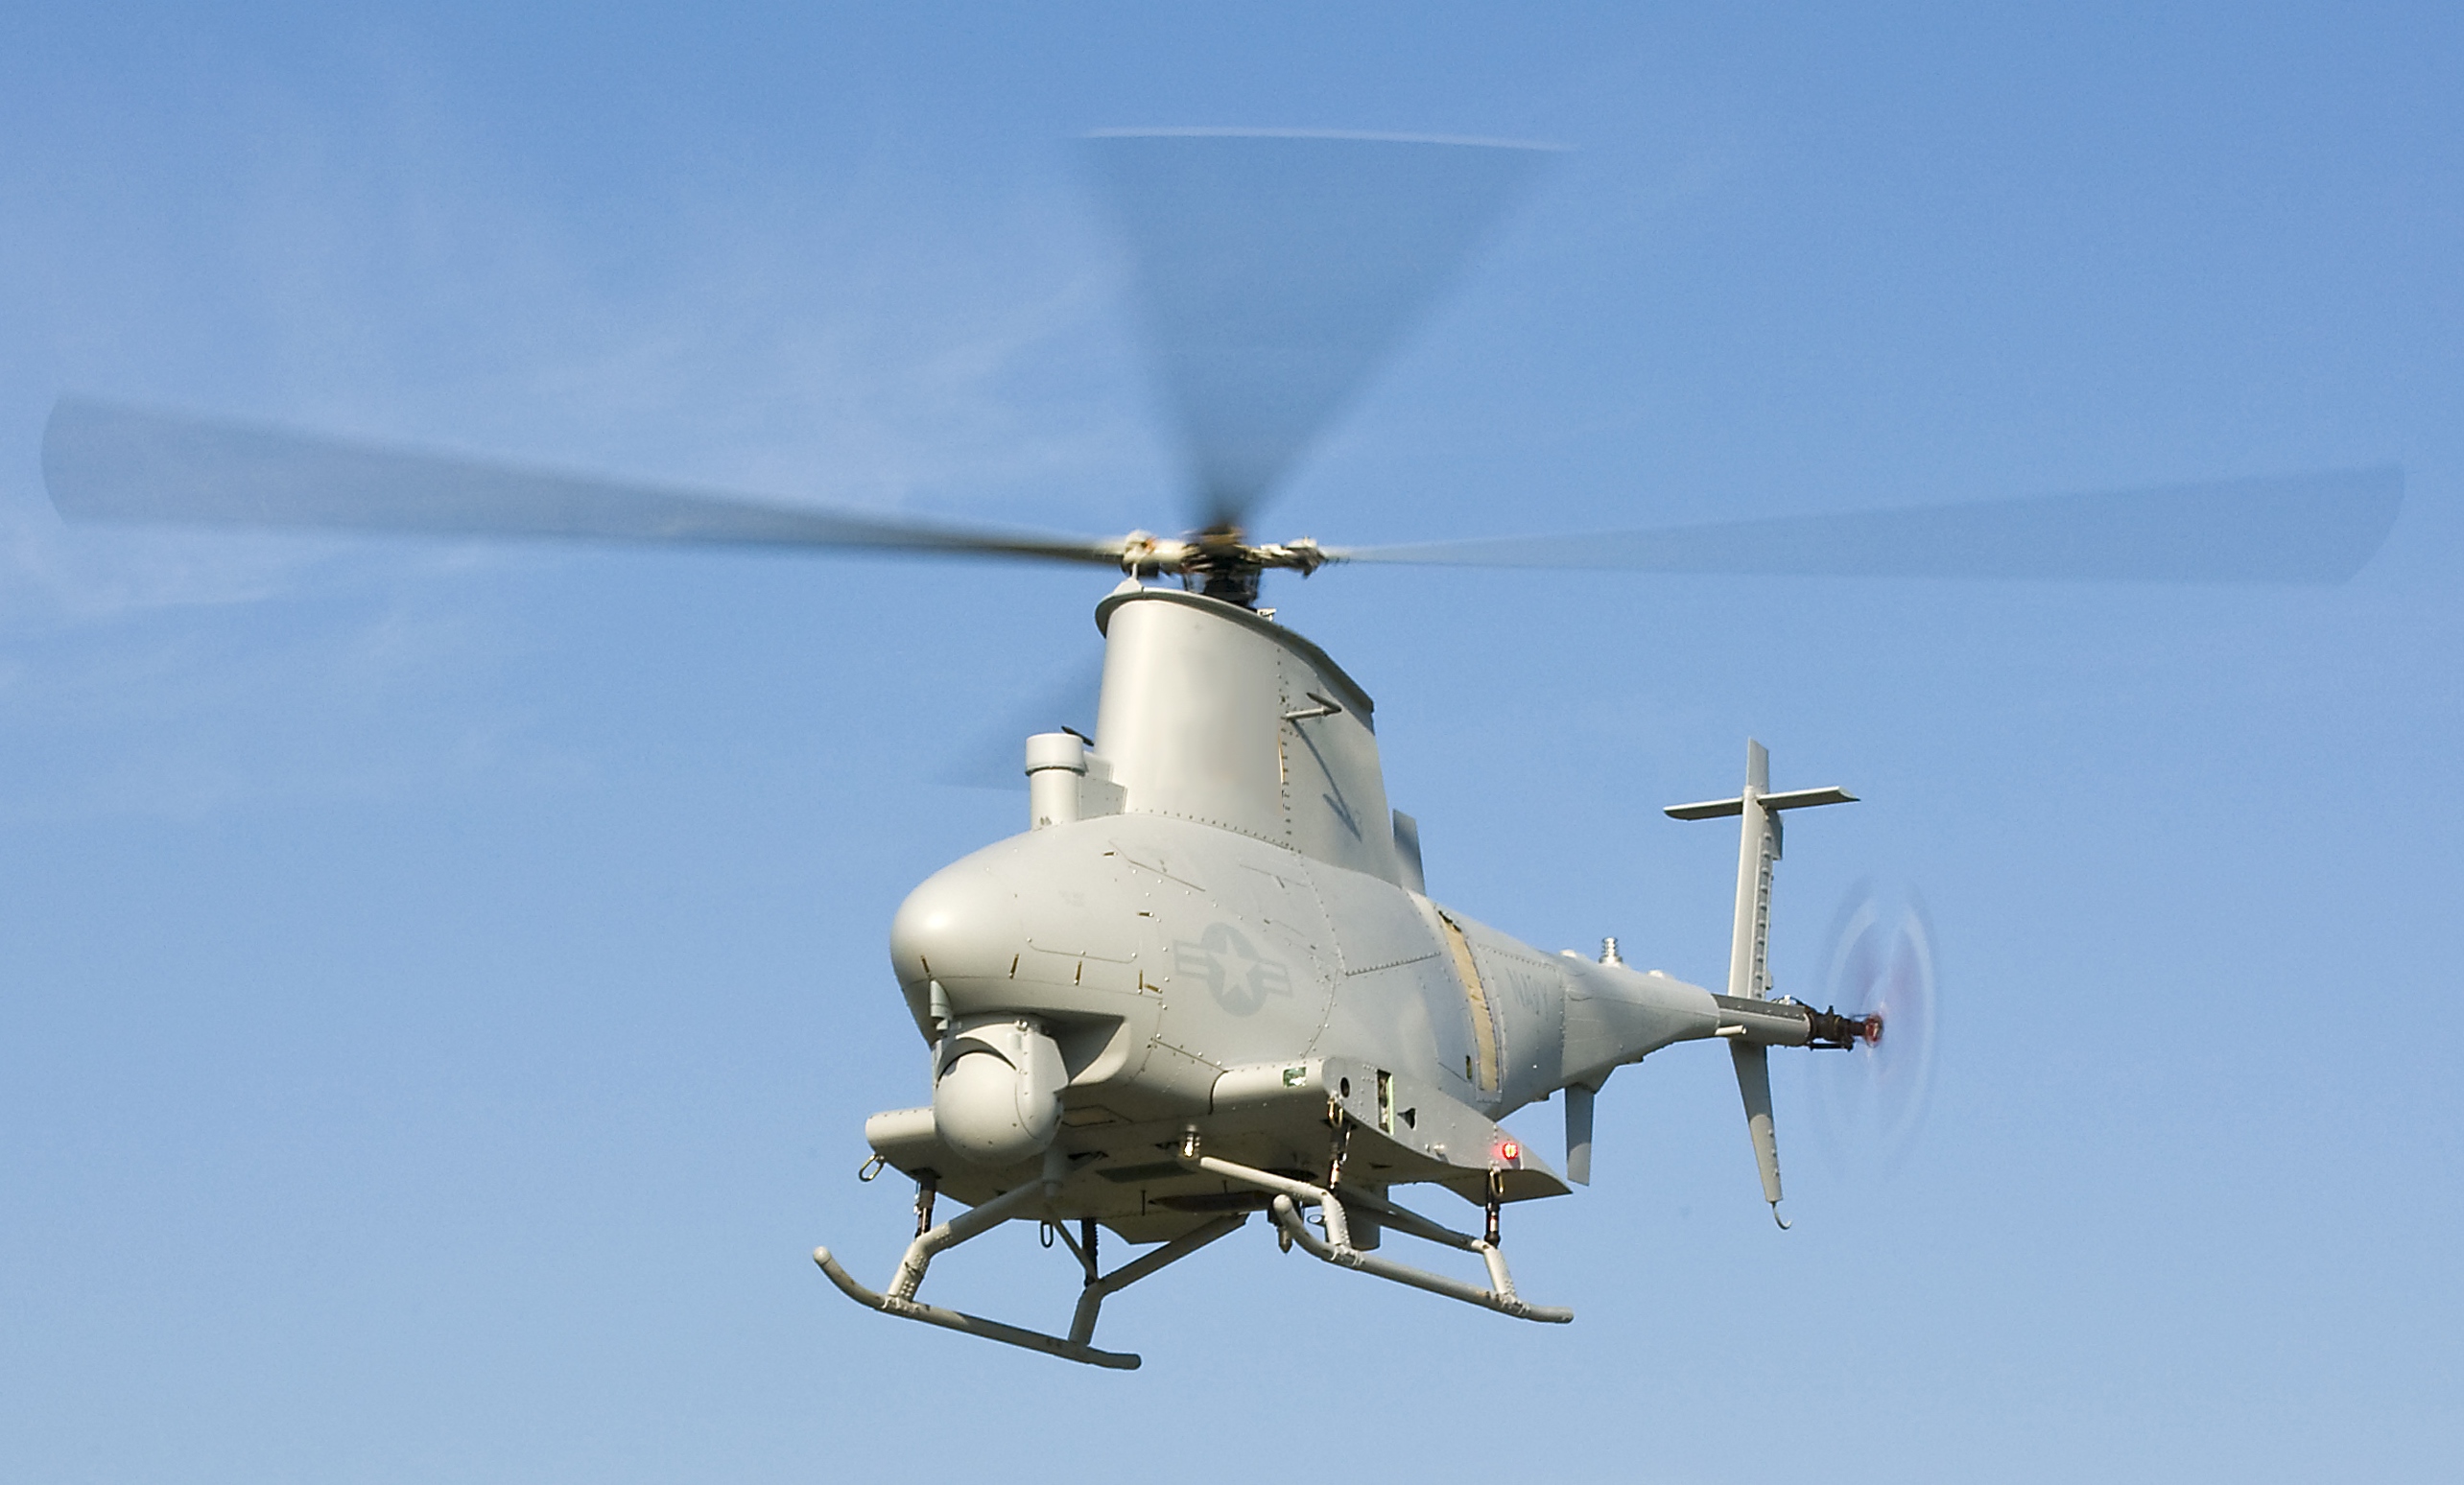 US_Navy_110930-N-JQ696-401_An_MQ-8B_Fire_Scout_unmanned_aerial_vehicle_%28cropped%29.jpg